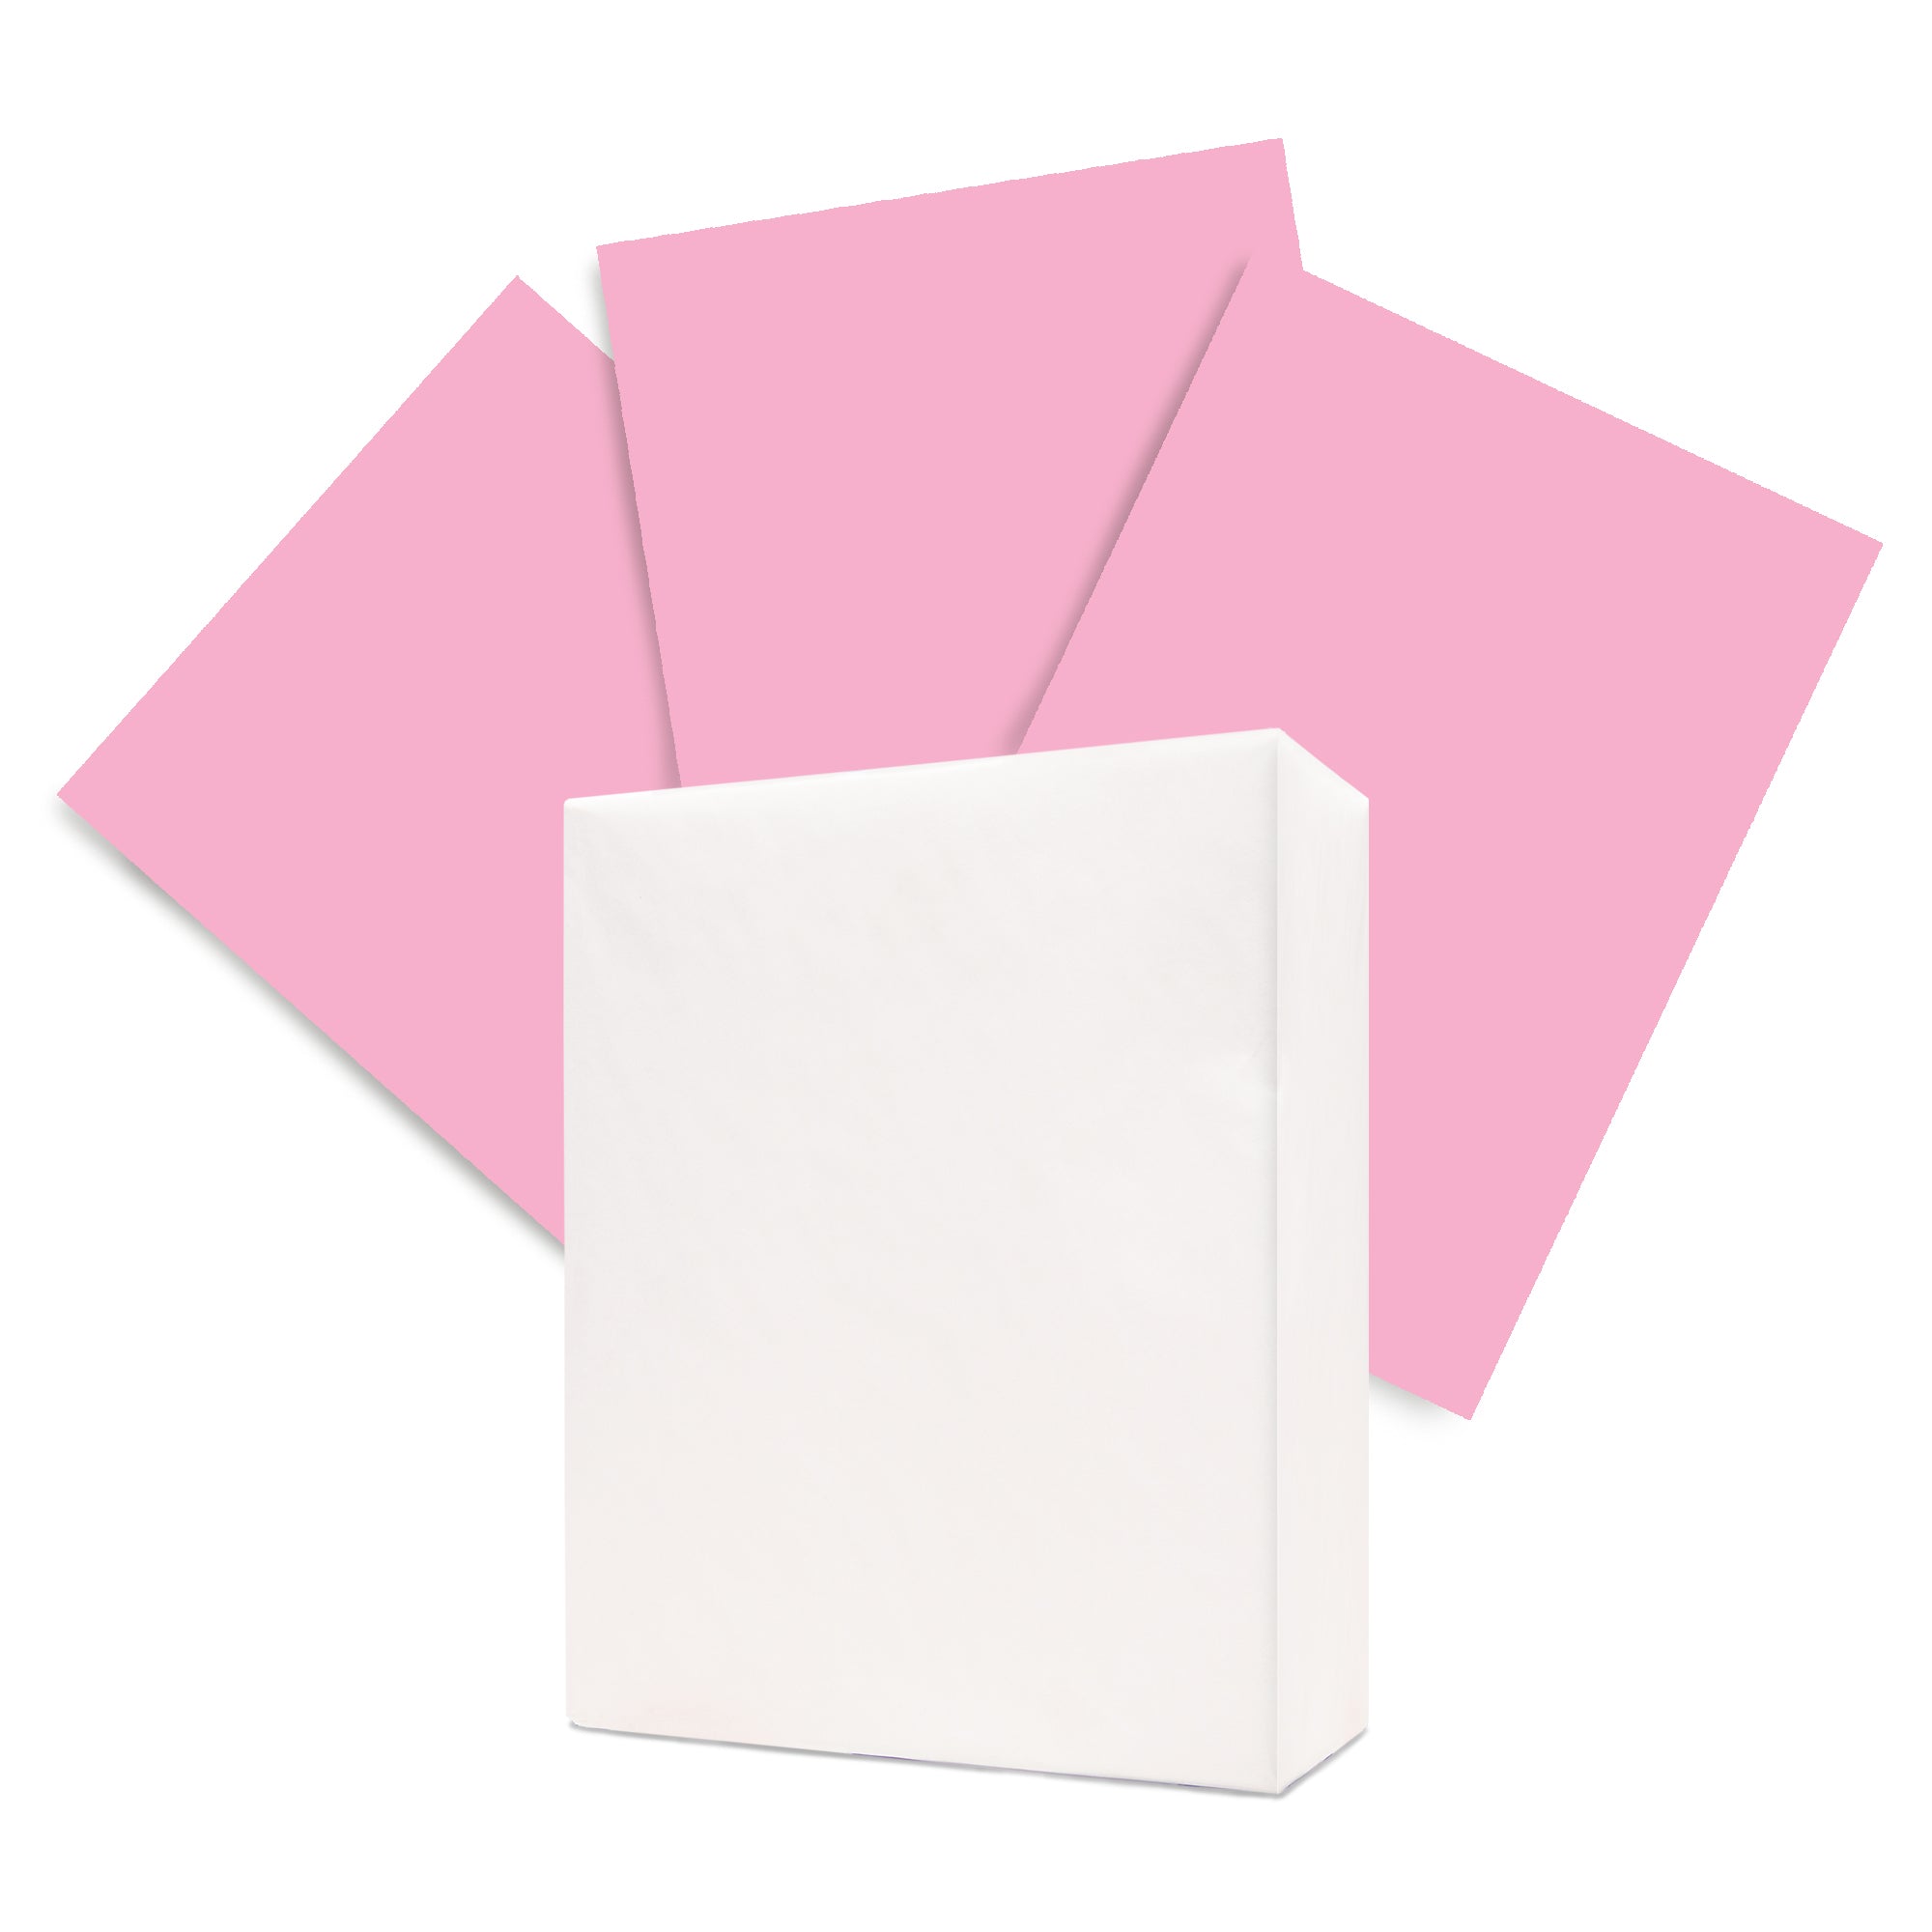 PP Lite A4 Size 70 GSM Copier Paper - 1 Ream (500 Sheets) - Pack of 5